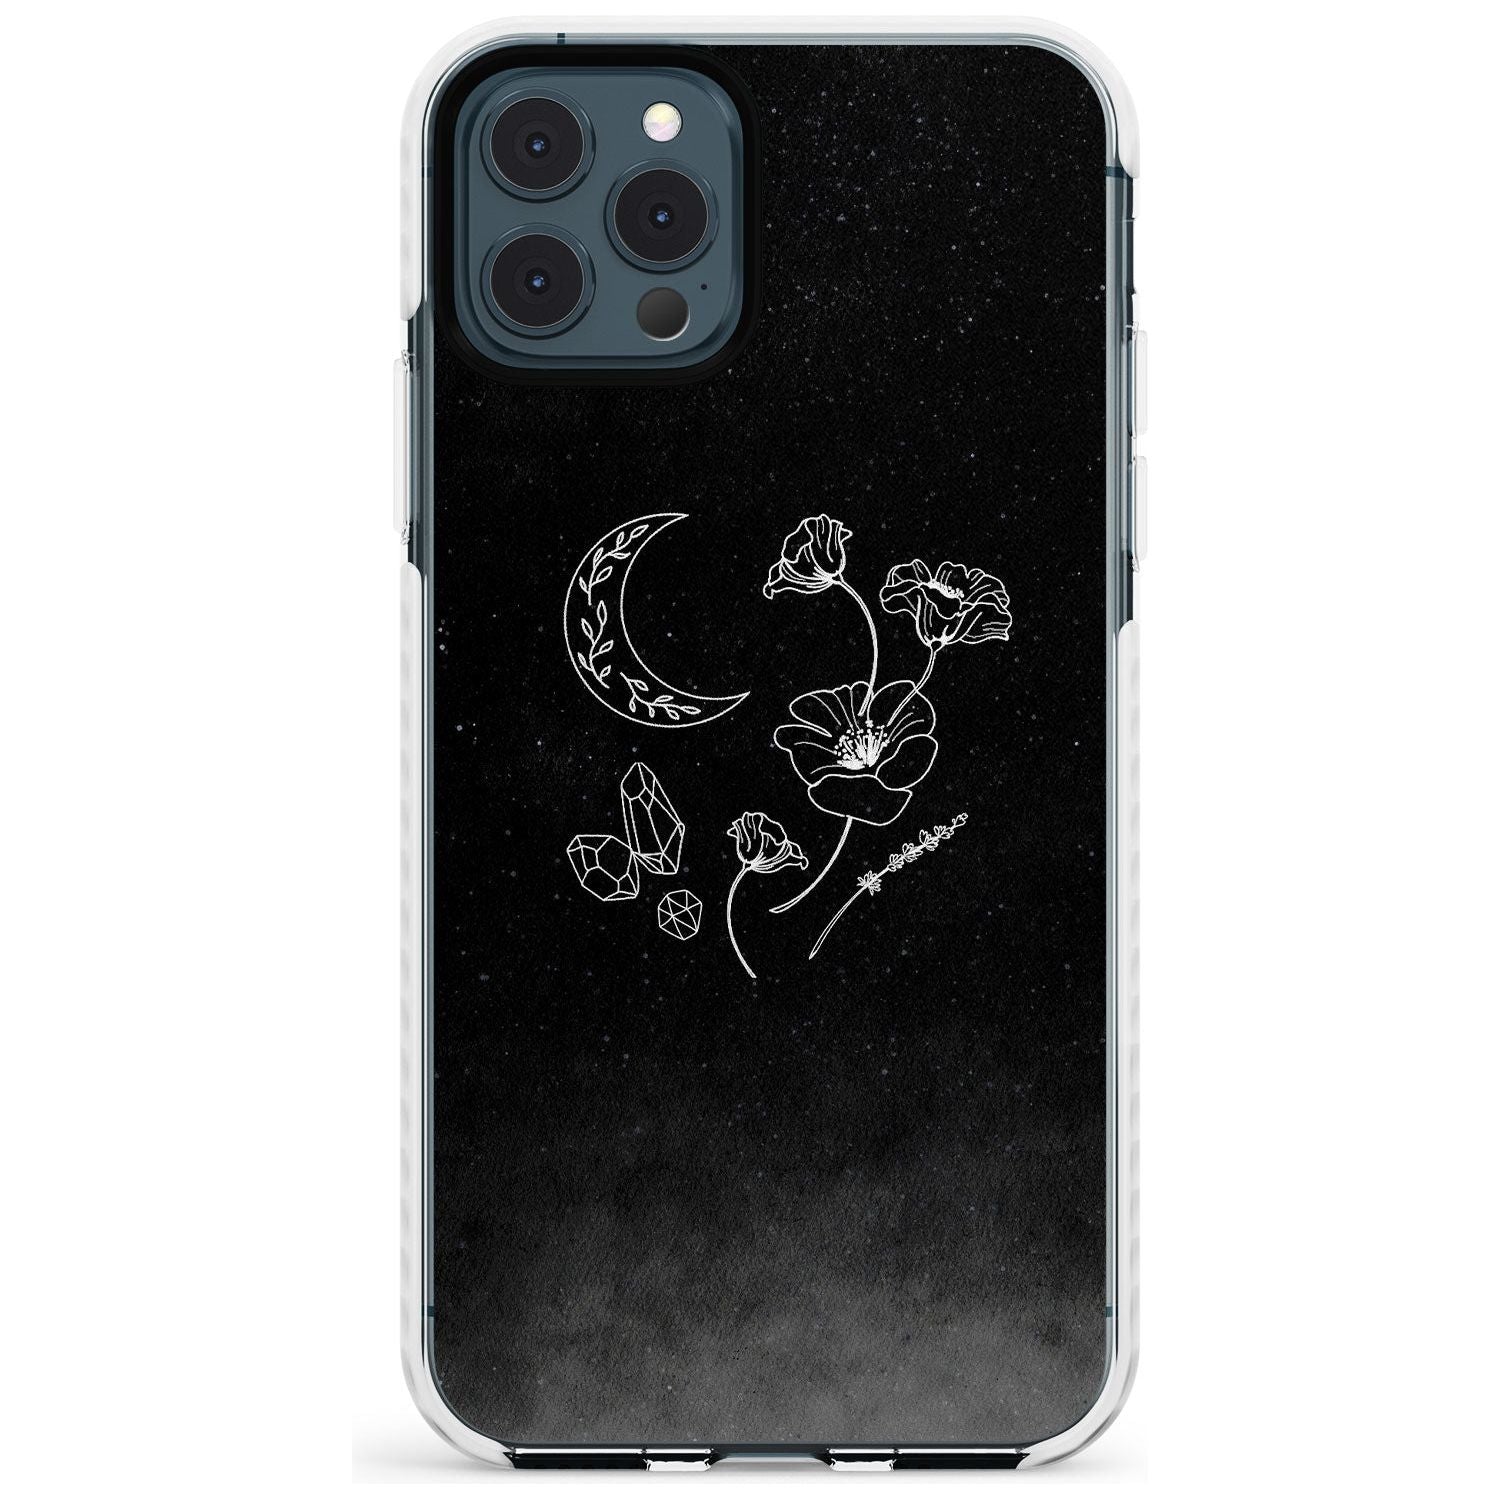 Crescent Moon Collection Slim TPU Phone Case for iPhone 11 Pro Max